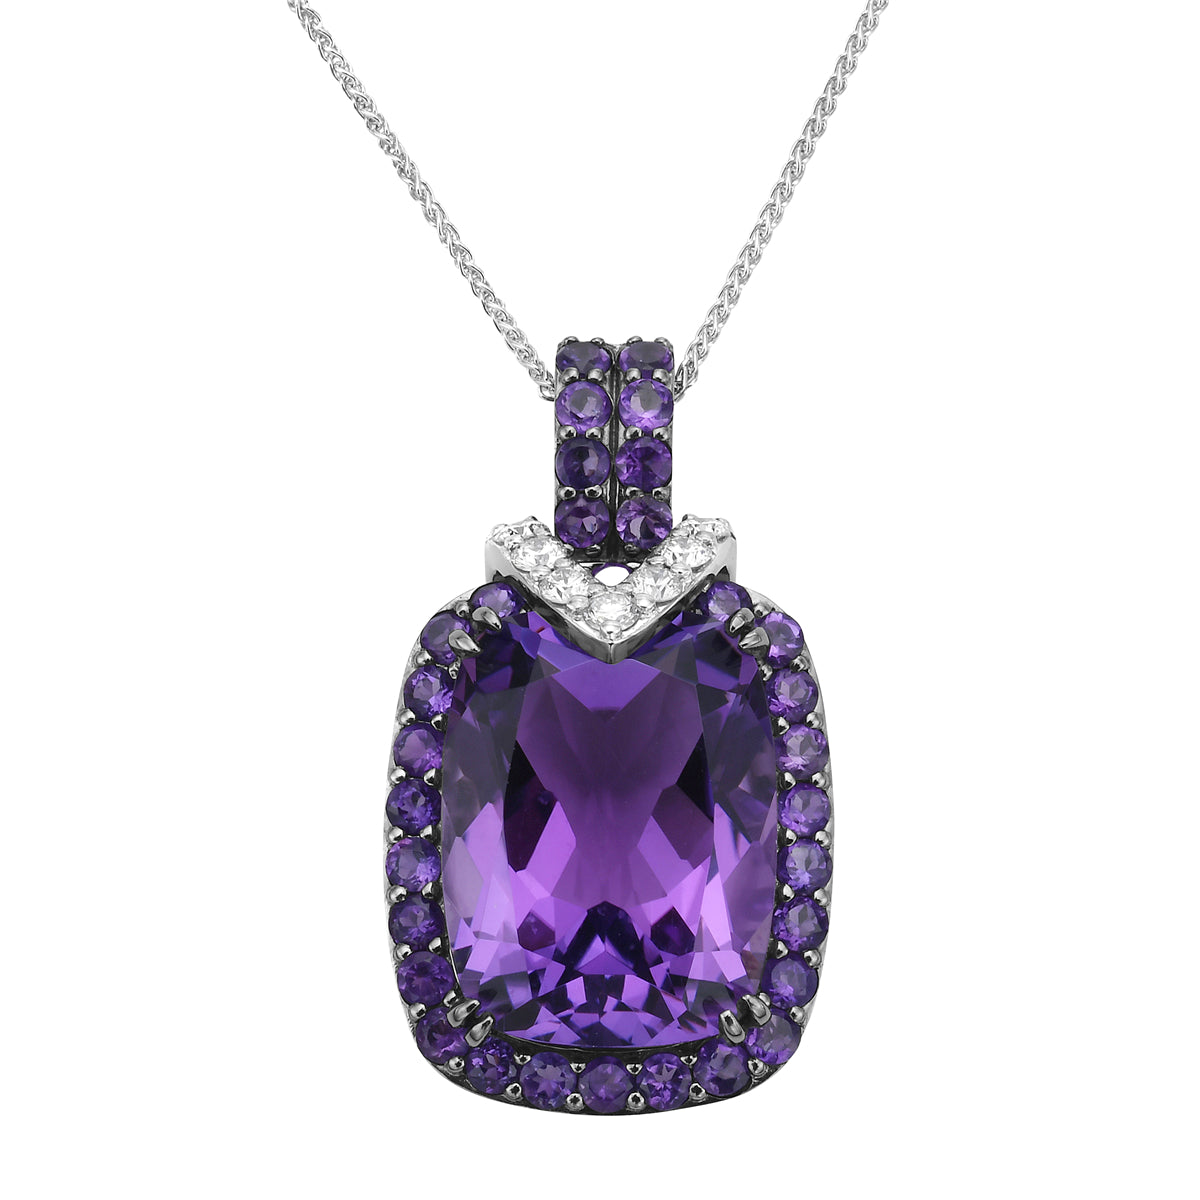 Pendant 14KB/4.2G 1AME-10.05CT 32AME -1.09CT 7RD-0.22CT Amethyst